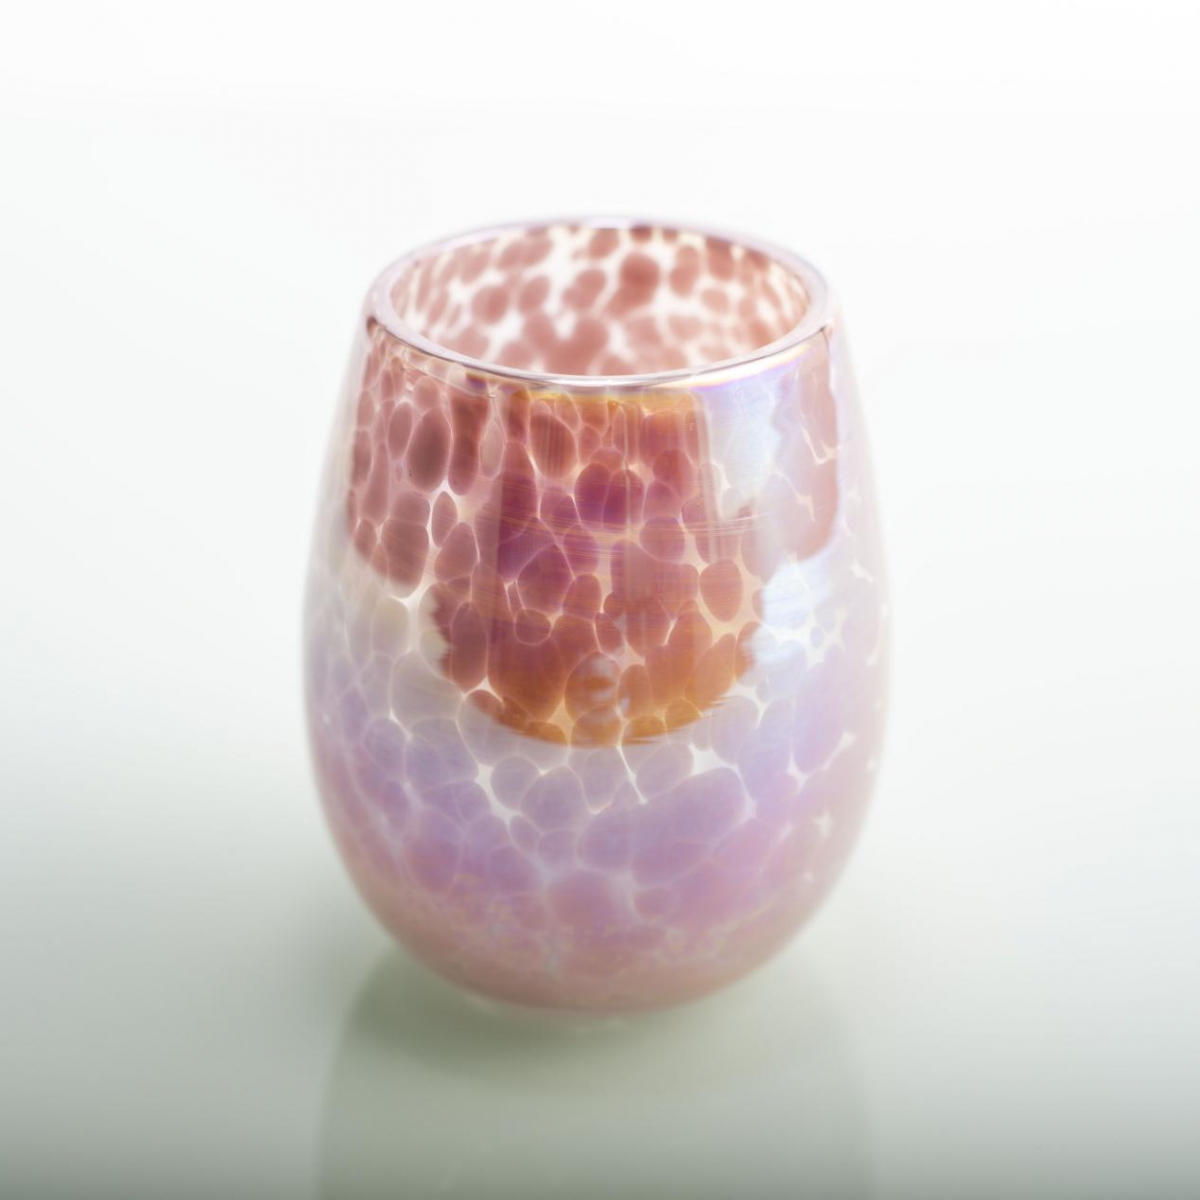 Pink Tortoise Shell Glaze Glass Candle Holder ：Luxury Glass Candle Jar , Best  Eggs Glass Jar, ,China Factory ,Price-HOWCANDLE-Candles,Scented Candles,Aromatherapy Candles,Soy Candles,Vegan Candles,Jar Candles,Pillar Candles,Candle Gift Sets,Essential Oils,Reed Diffuser,Candle Holder,